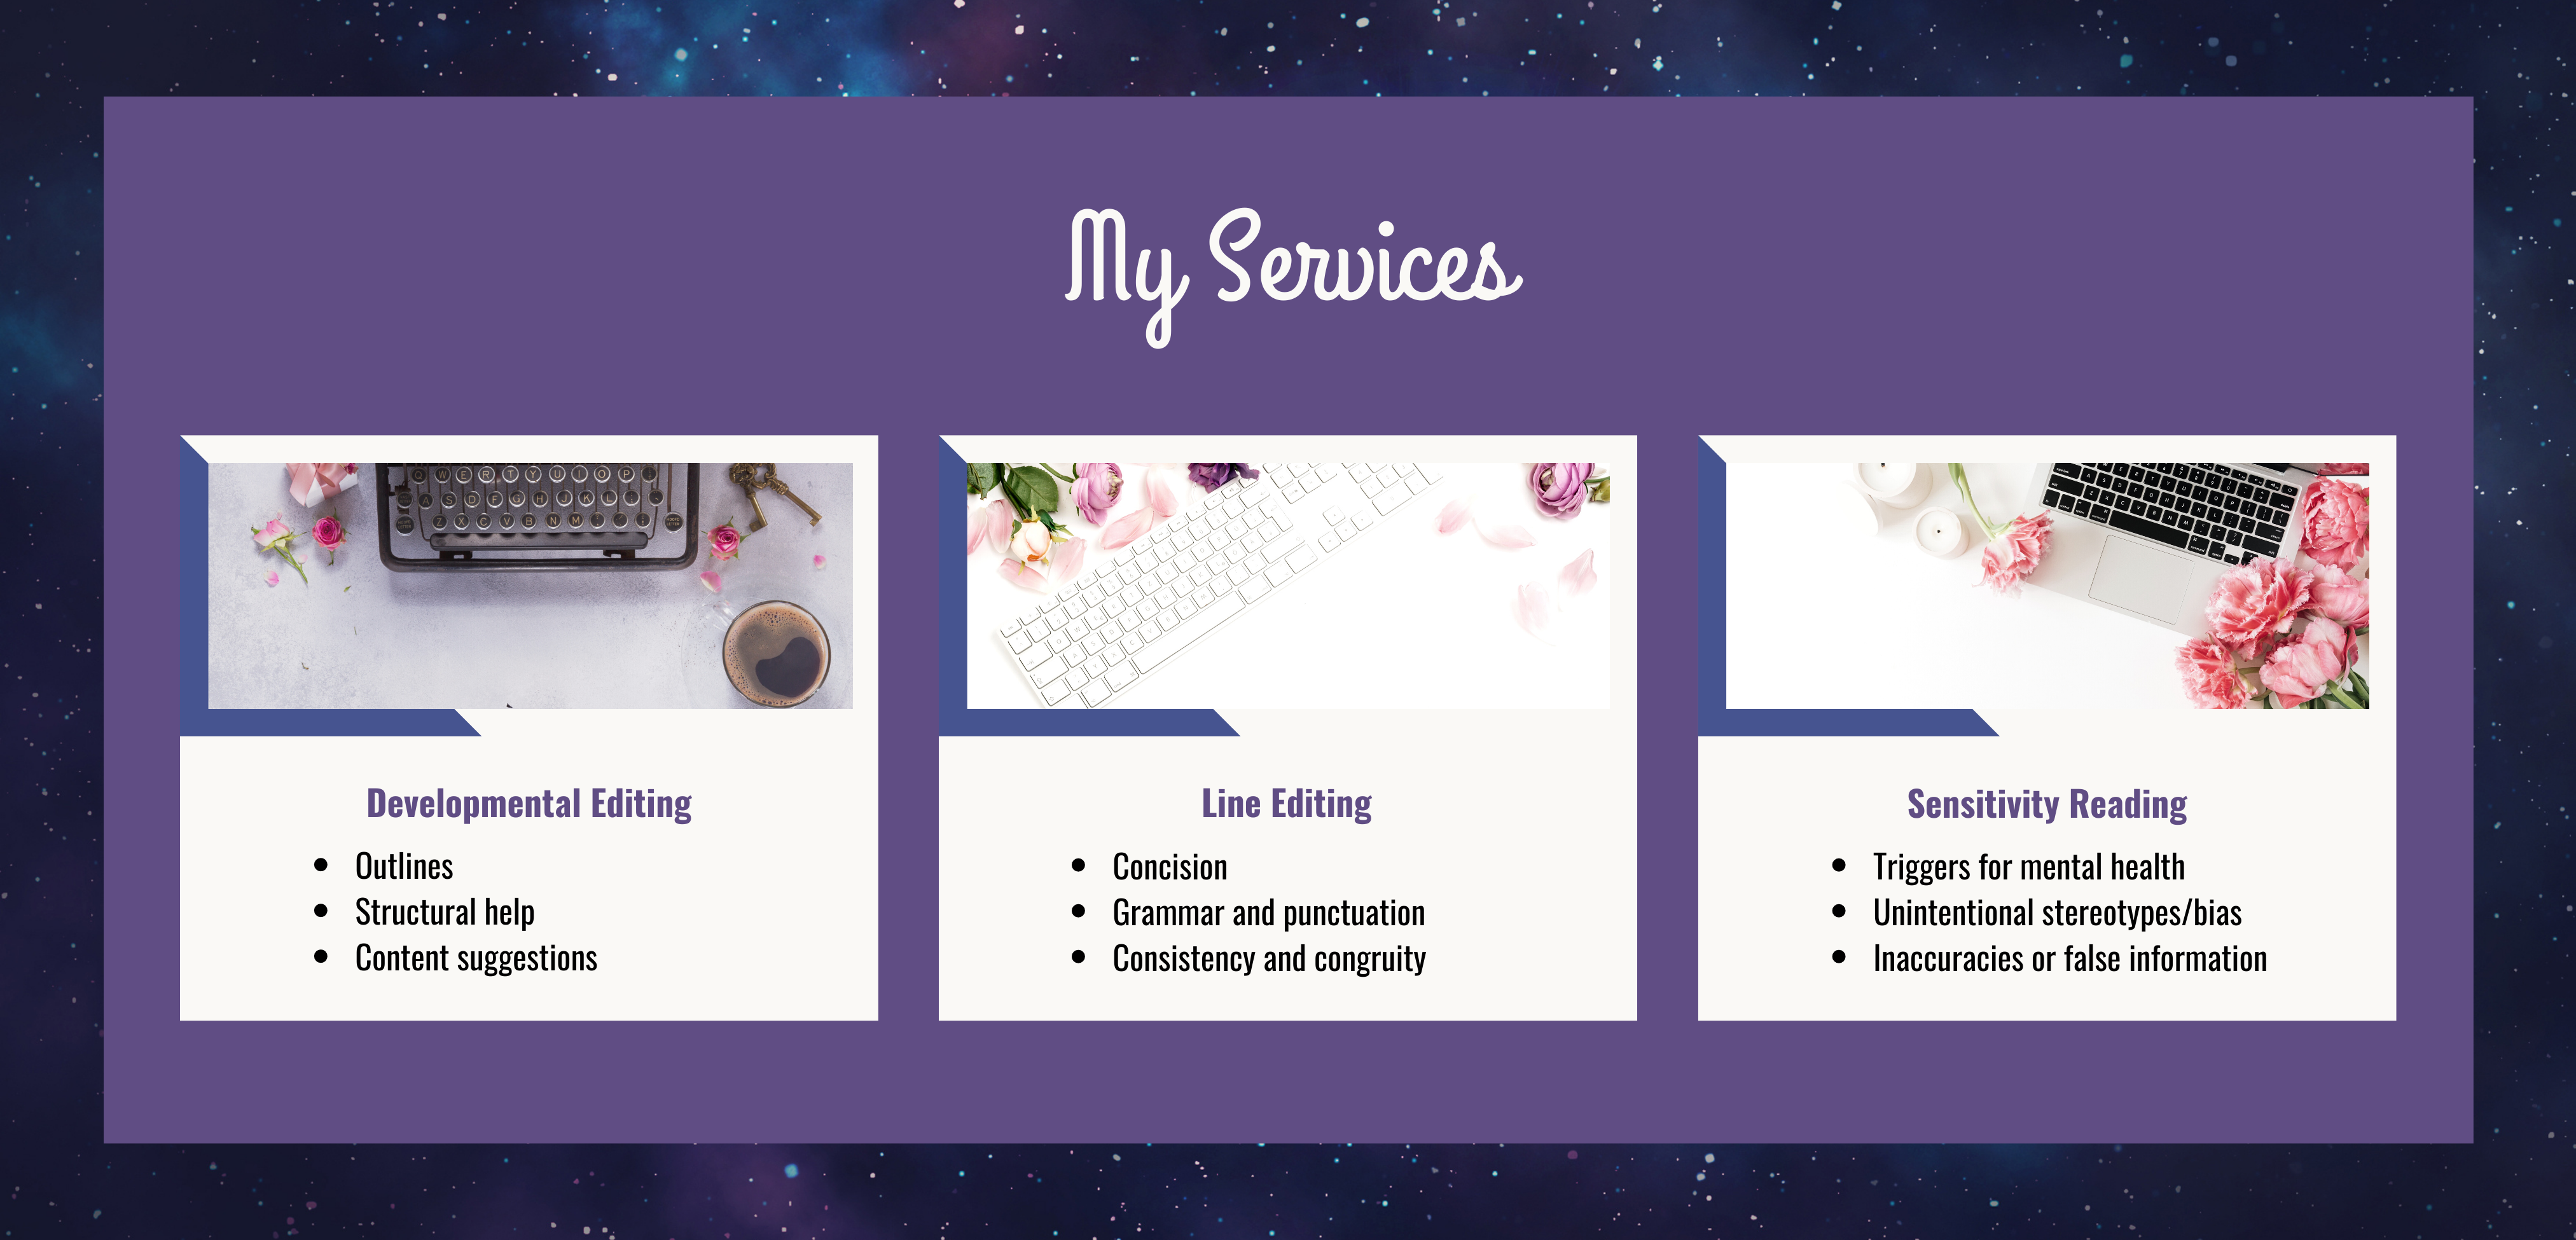 My Services. Developmental Editing: outlines, structural help, and content suggestions. Line editing: concision, grammar and punctuation, and consistency and congruity. Sensitivity reading: triggers for mental health, unintentional stereotypes/bias, and inaccuracies or false information.